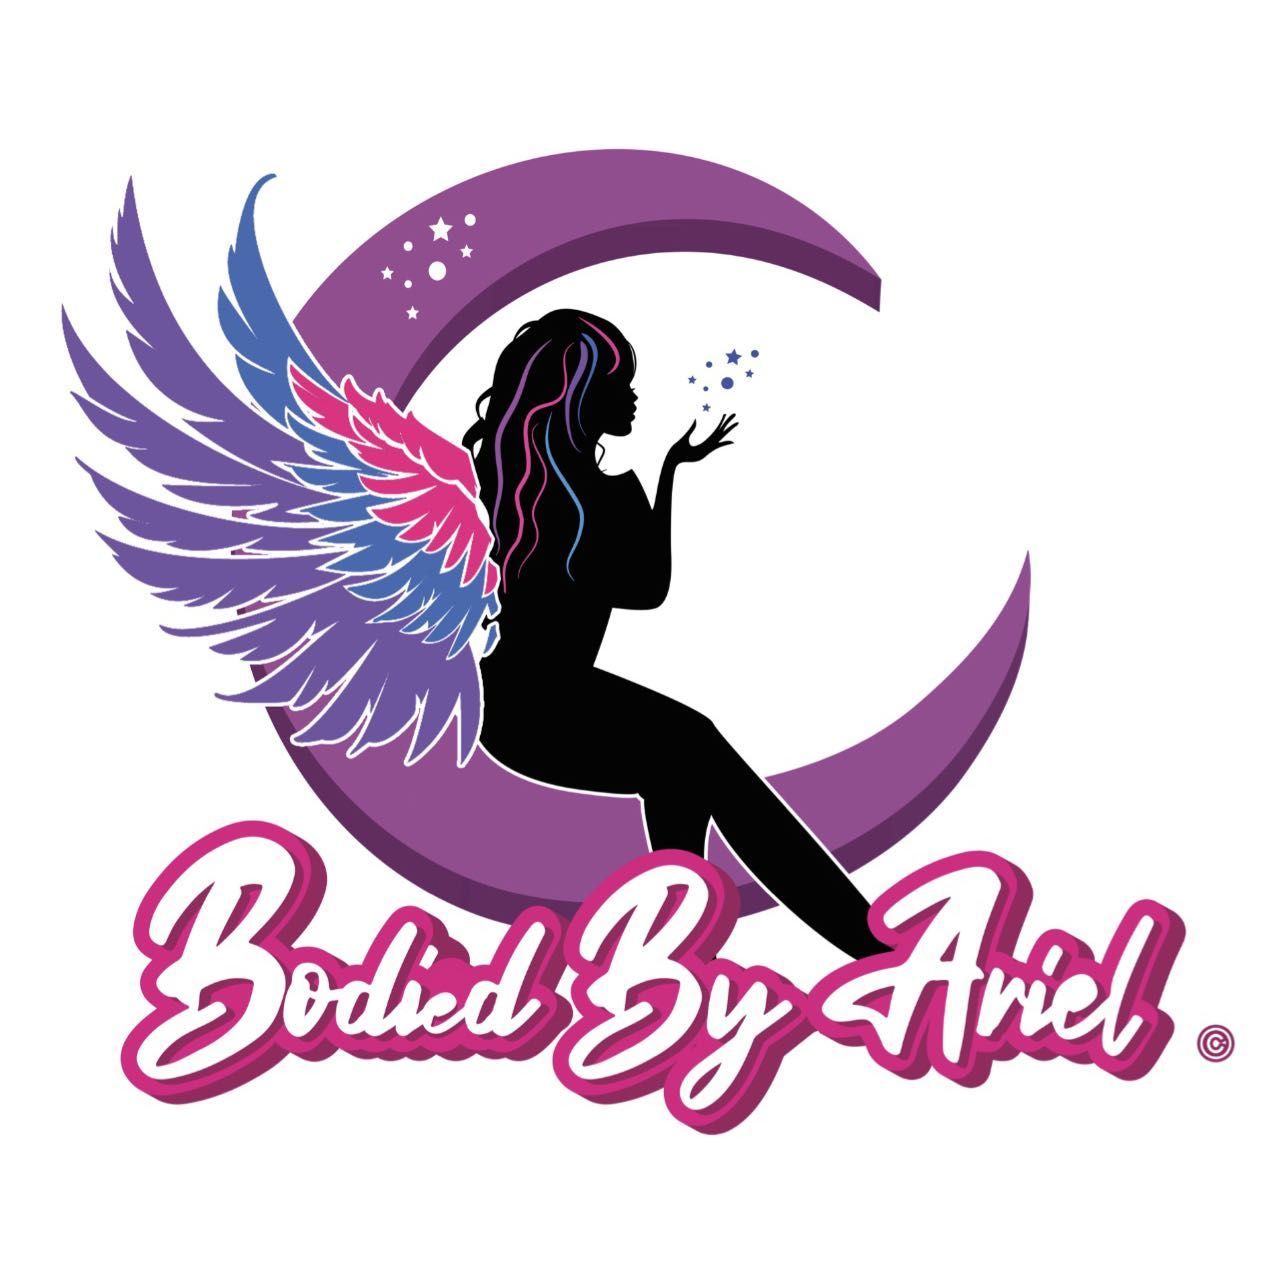 Bodied by Ariel, 1020 Chicago road, 2 floor, Chicago Heights, 60411